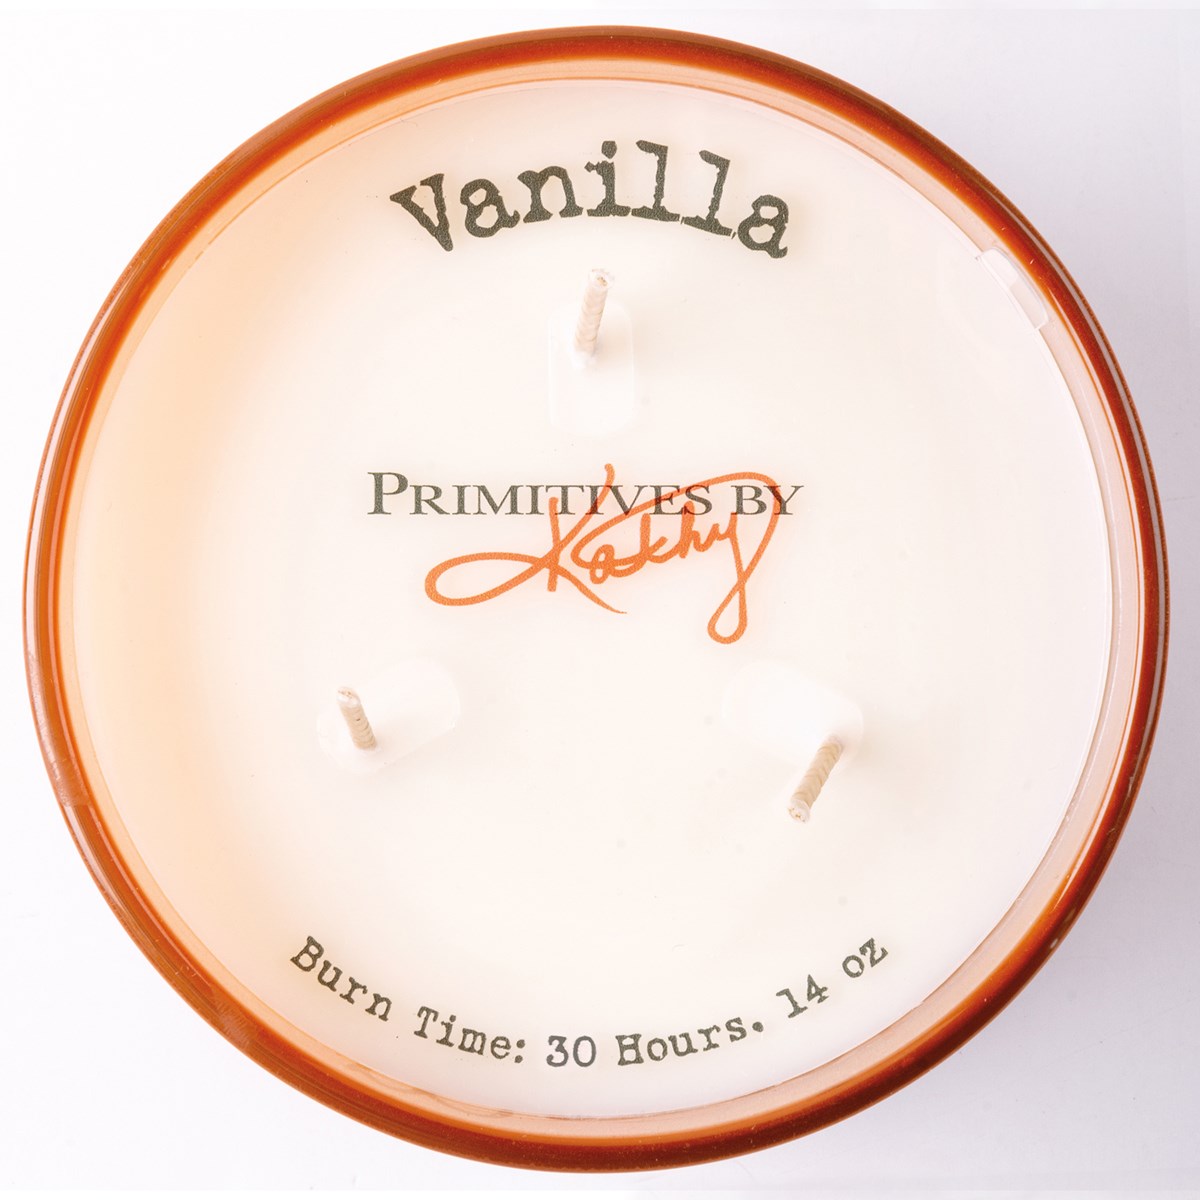 Jar Candle - Maneater - 14 oz., 4.50" Diameter x 3.25" - Soy Wax, Glass, Cotton